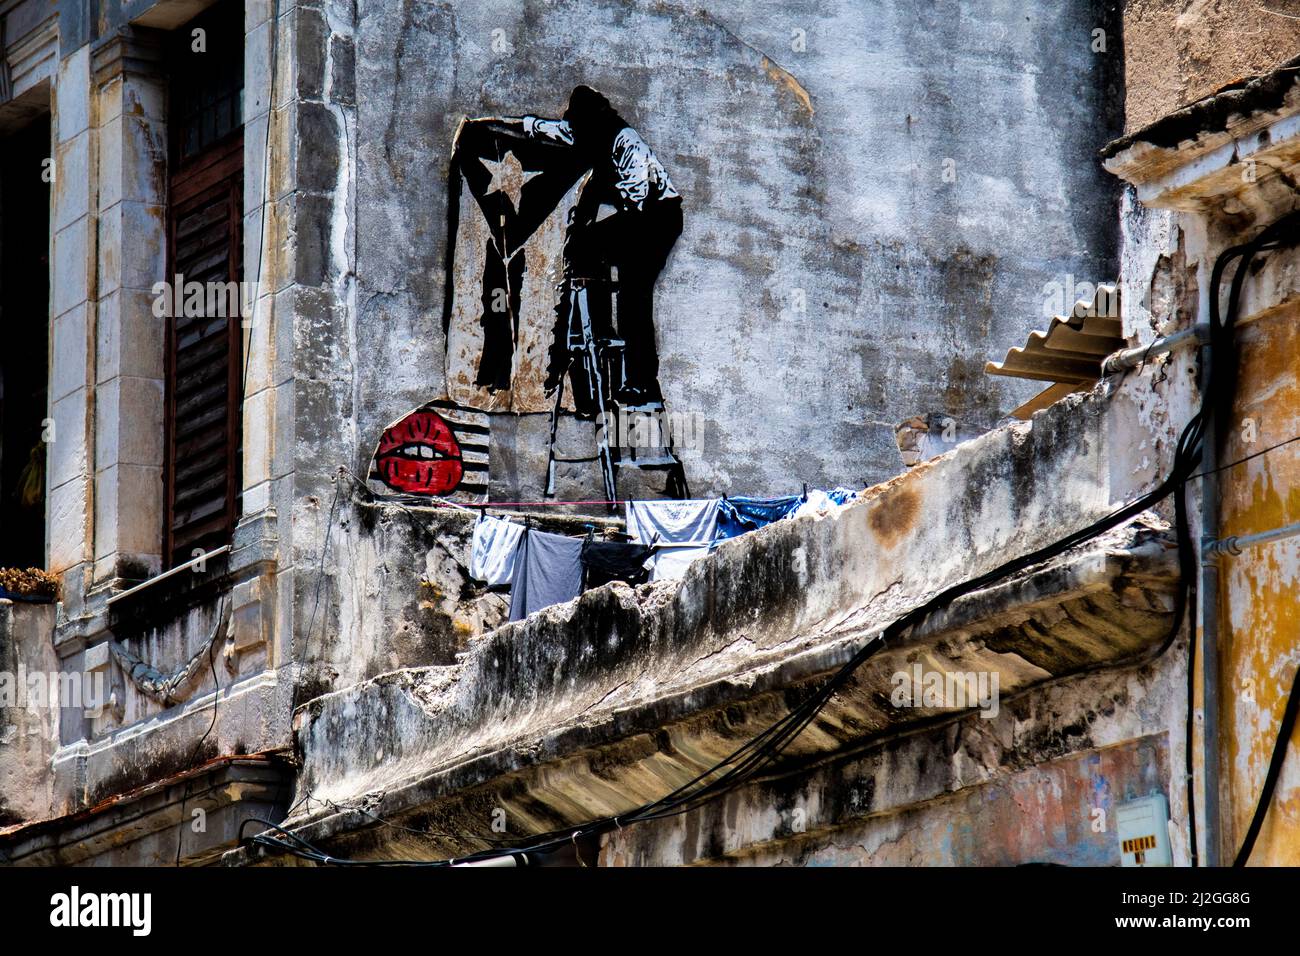 Interesting mural artwork mural on the balcony of a house in Havana, Cuba with a Cuban flag in black & white drawn. Stock Photo